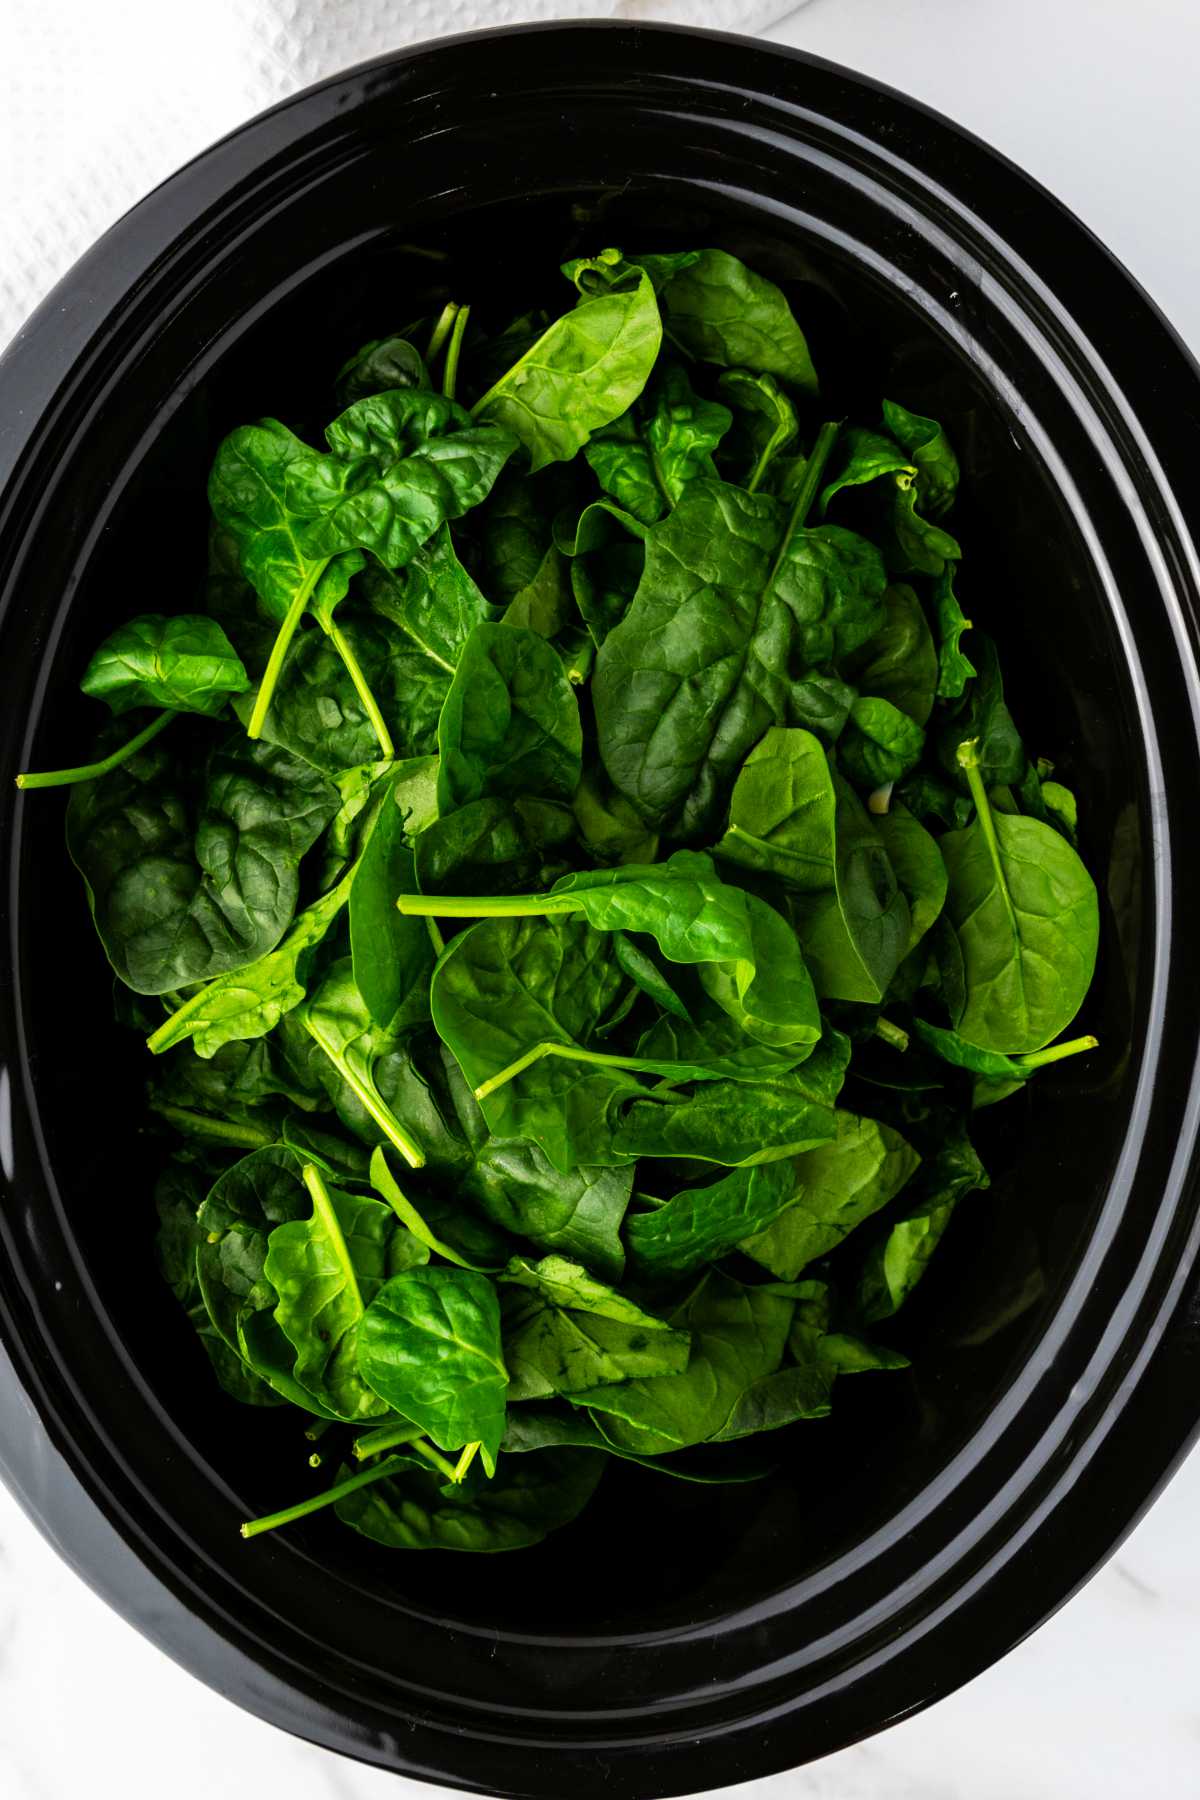 crockpot with fresh greens in it.